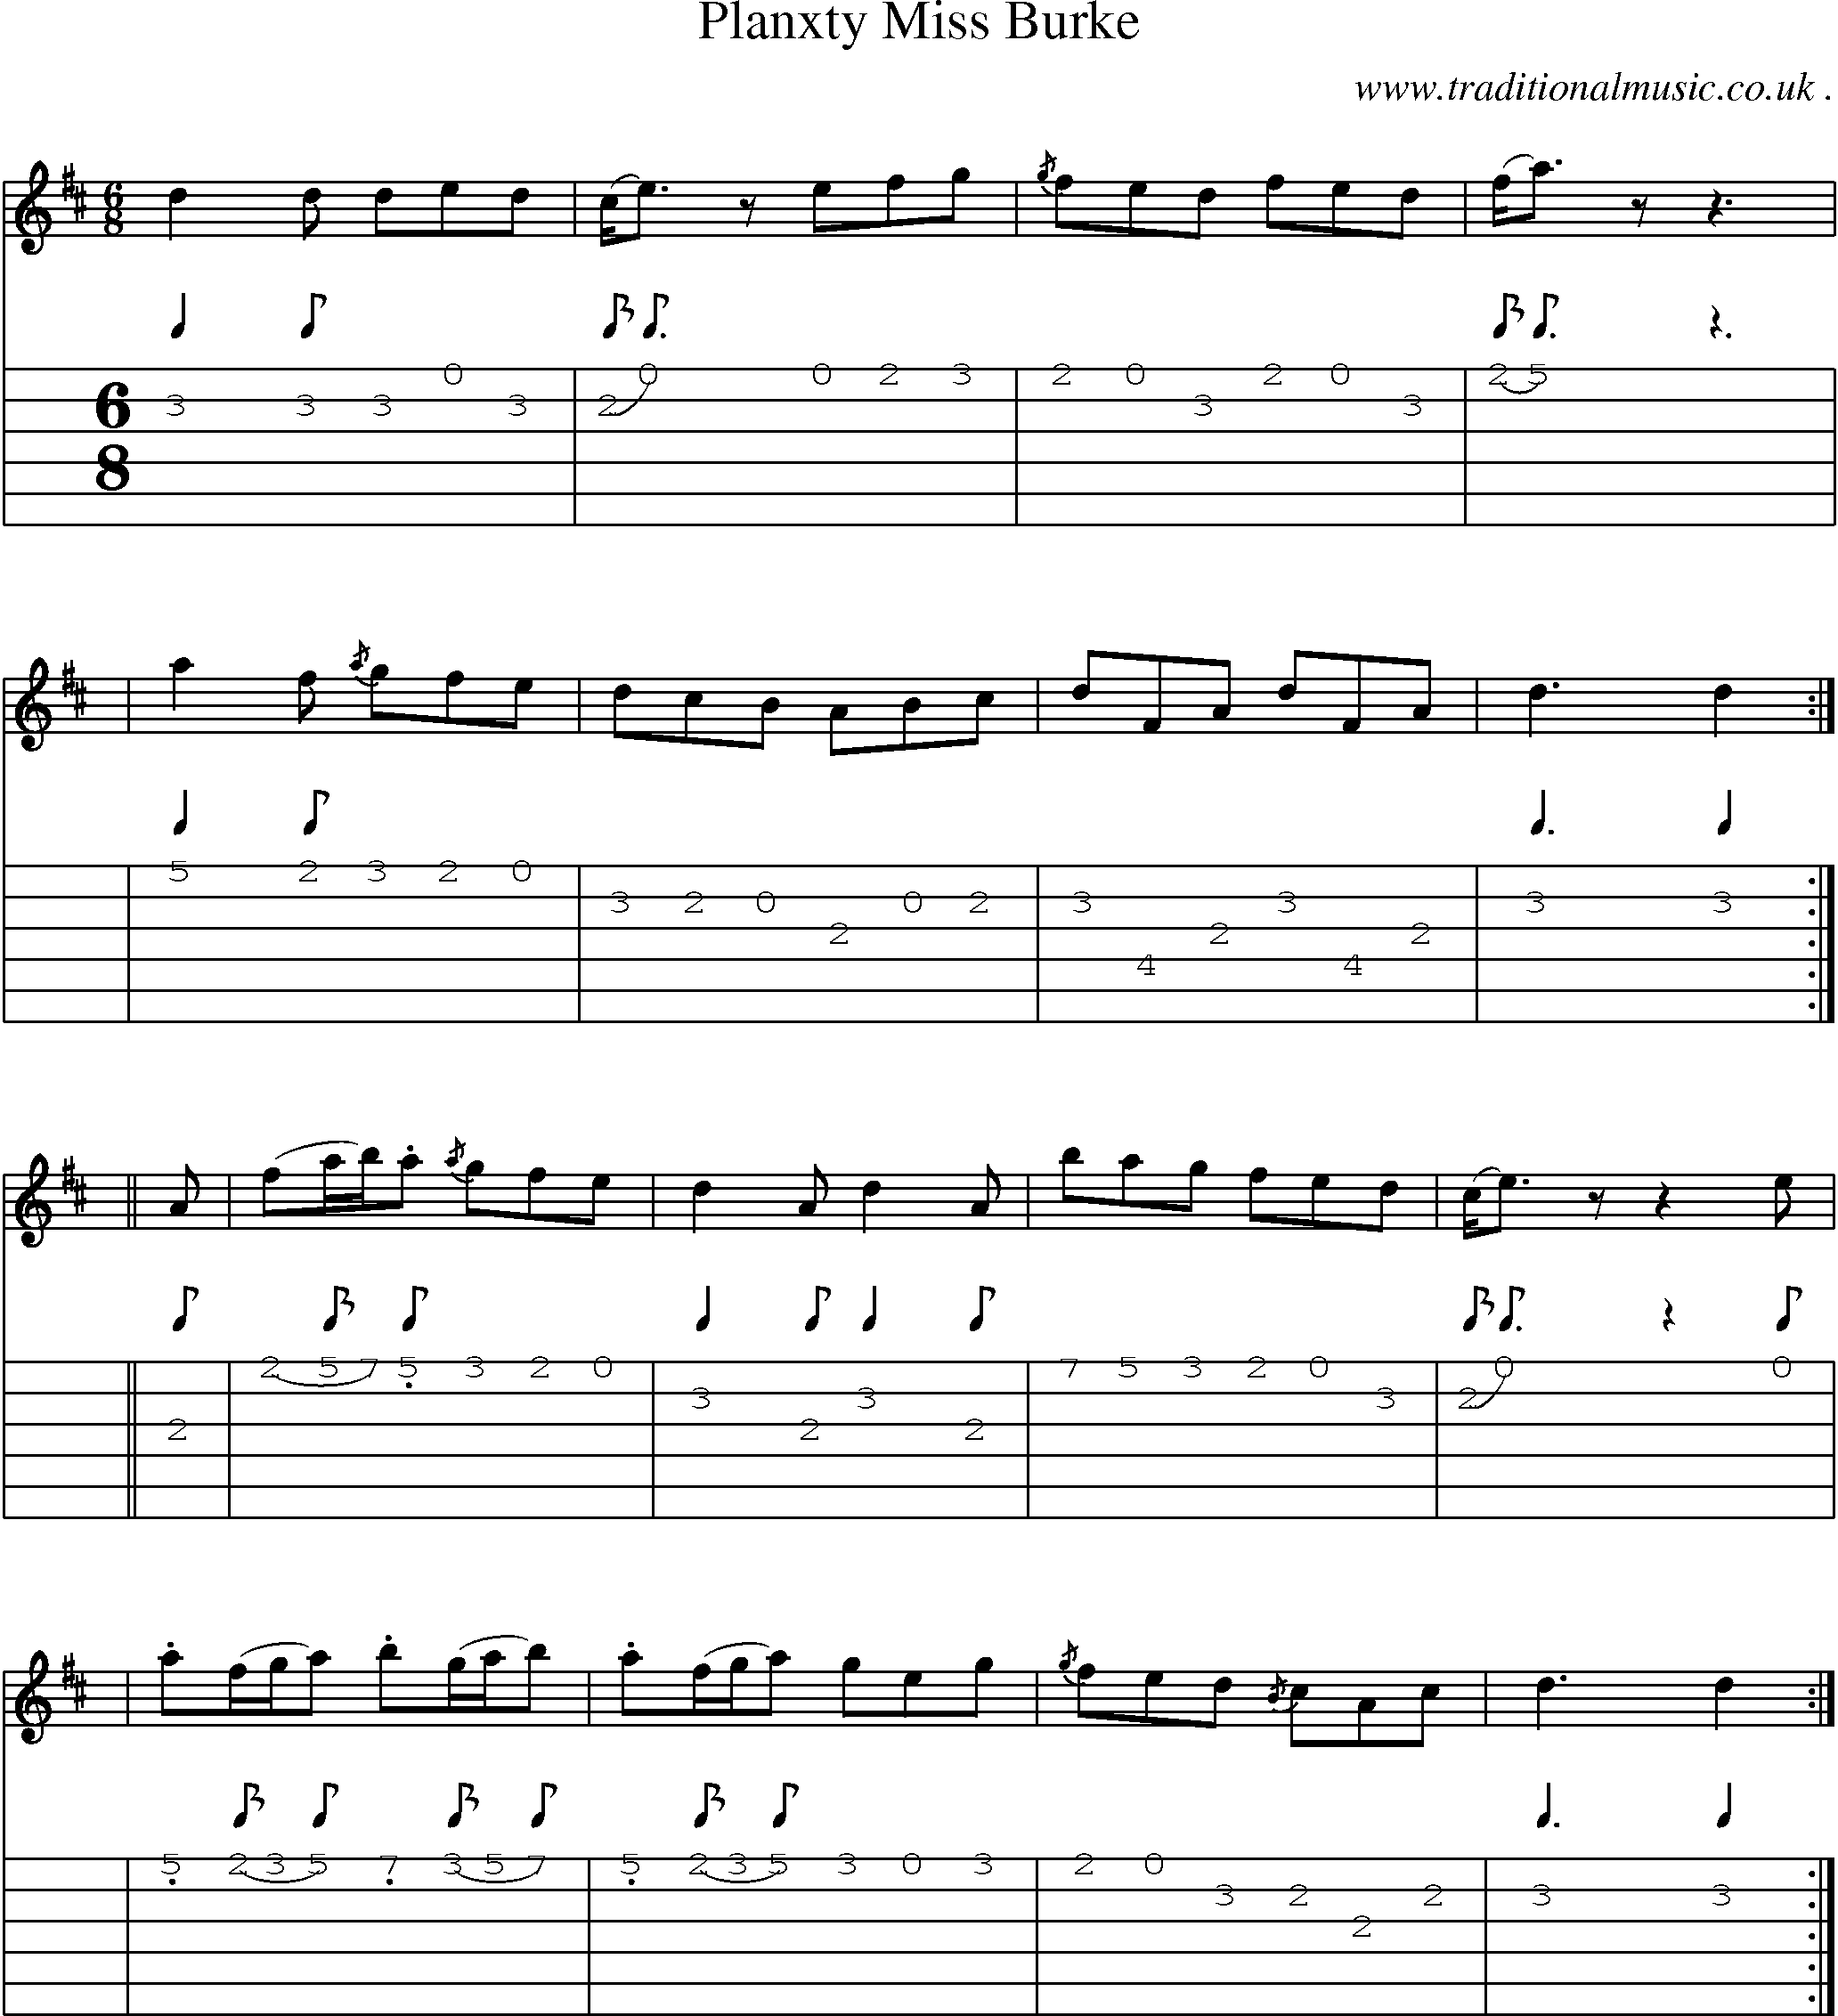 Sheet-music  score, Chords and Guitar Tabs for Planxty Miss Burke